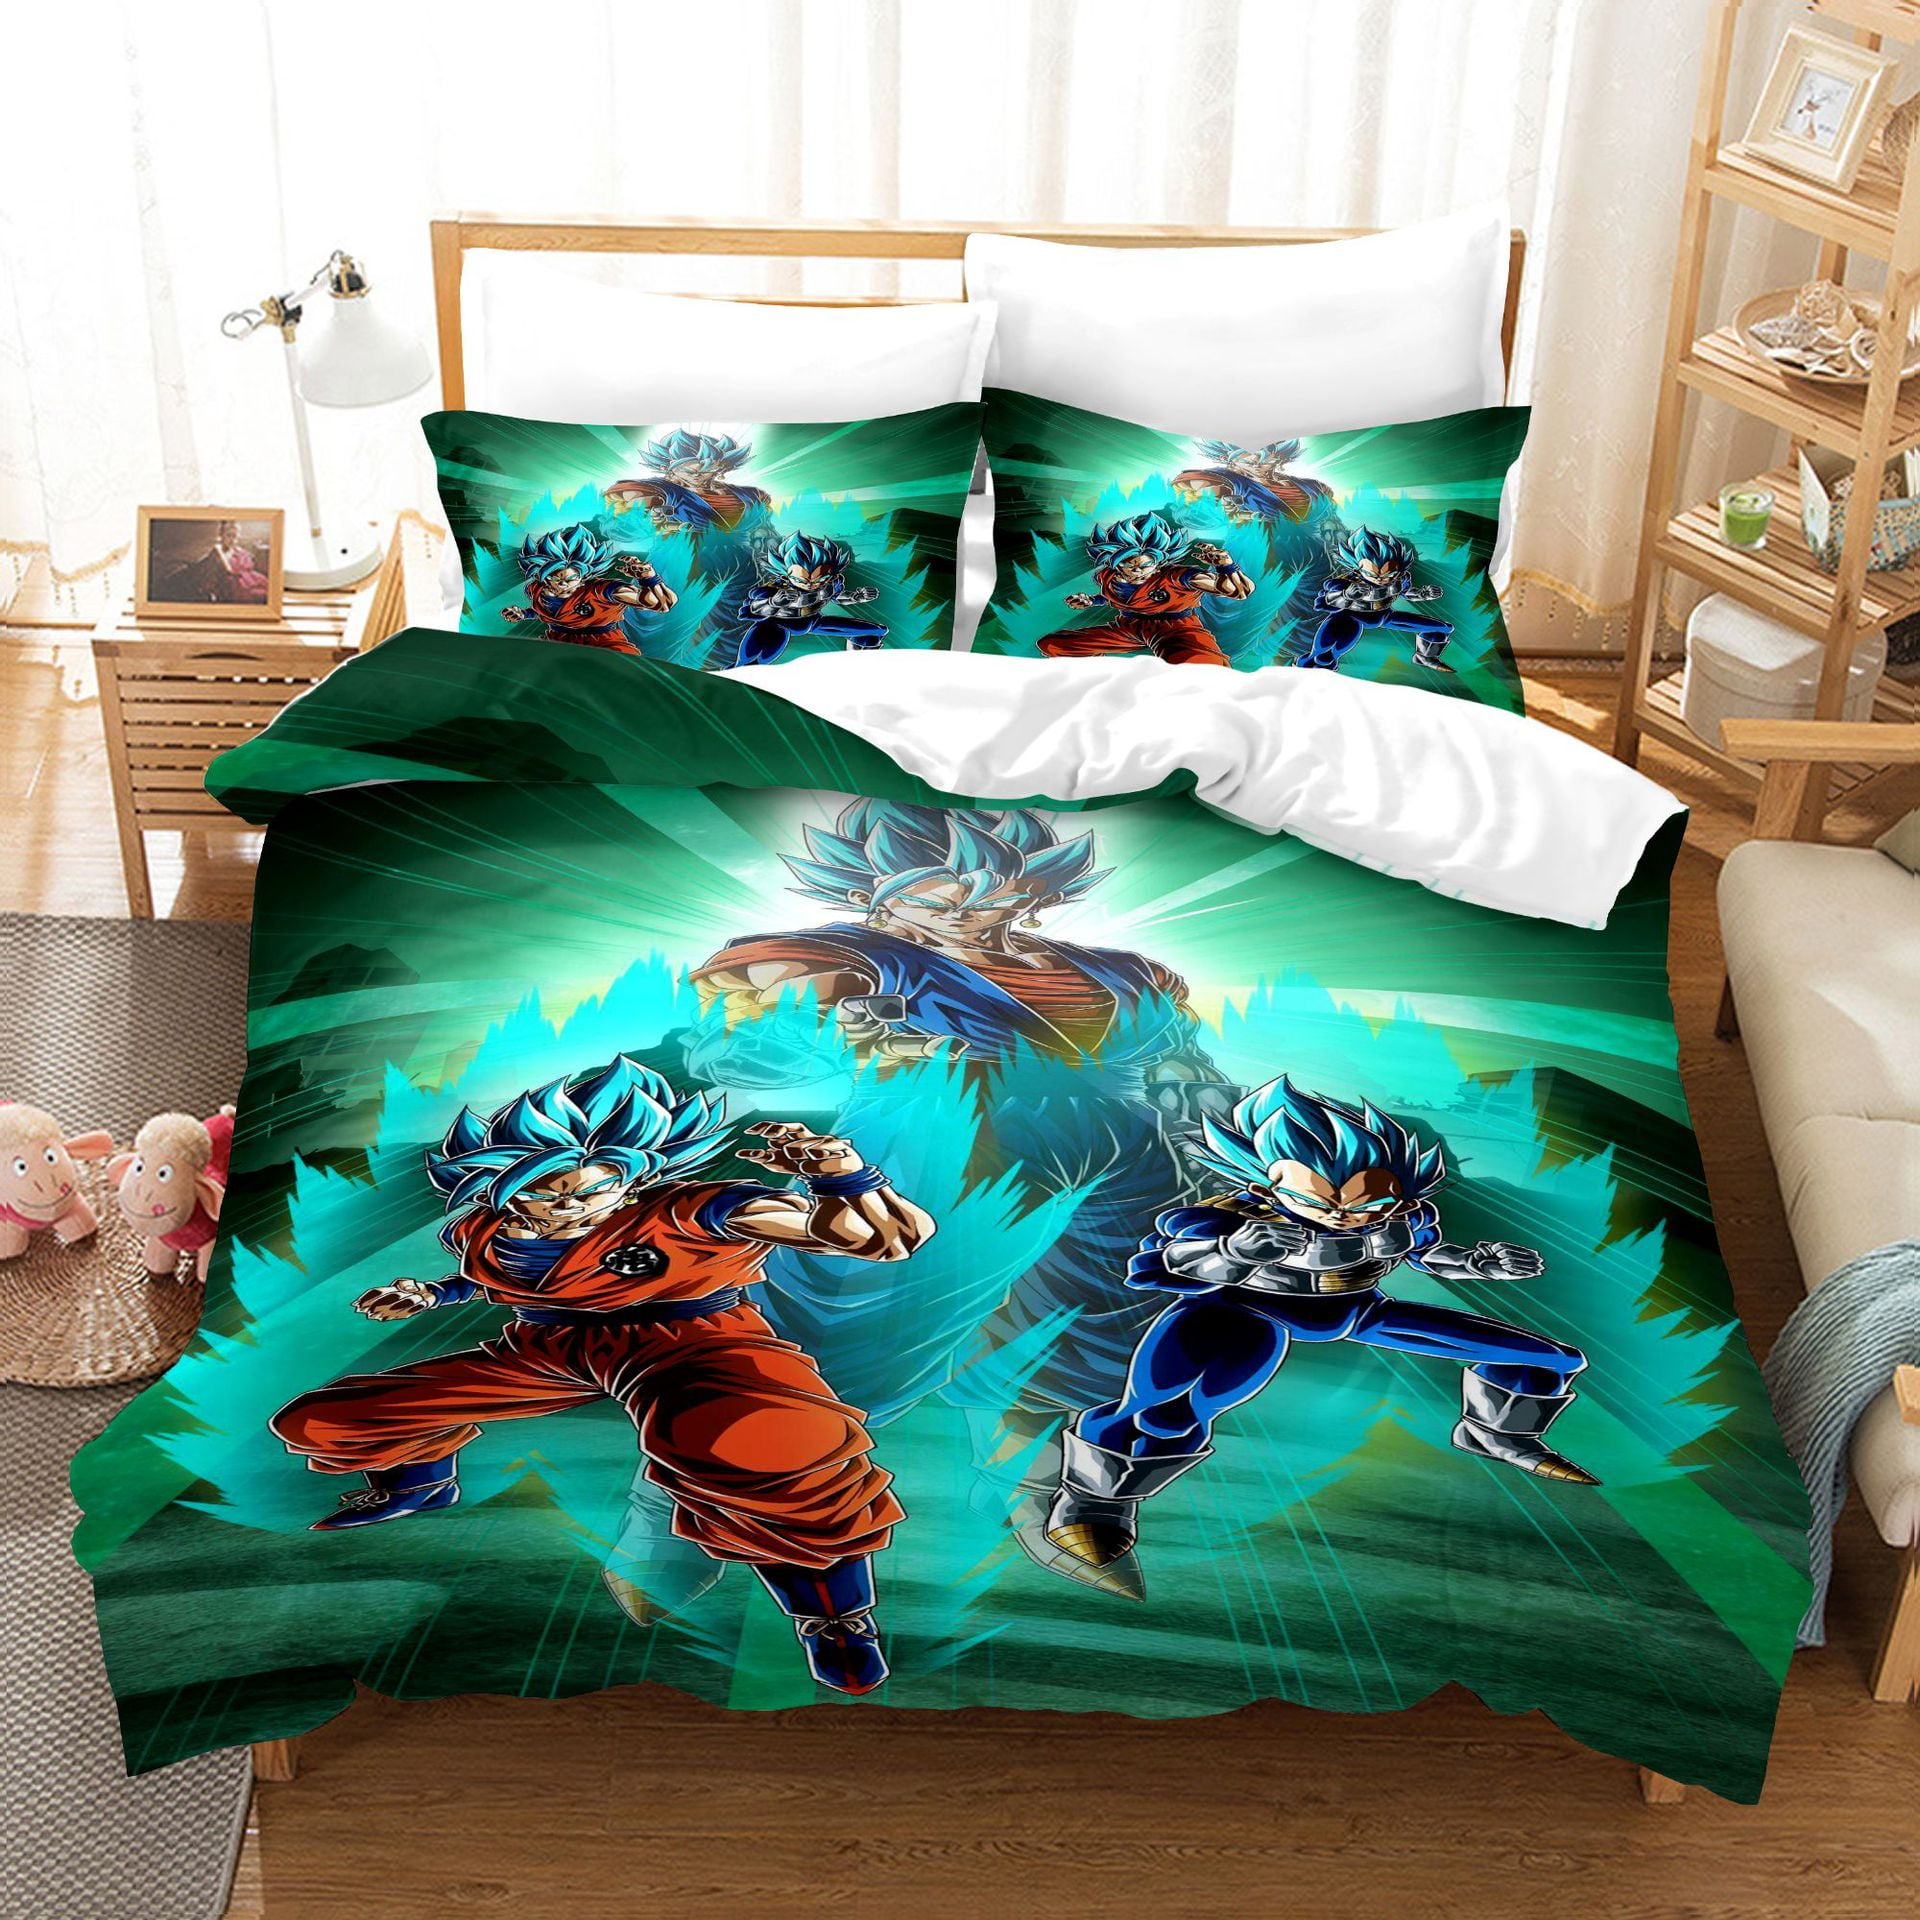 Cartoon Anime Bedding Set 3pcs-Judy Dre Am Home Textile Polyester Printing Duvet  Cover Sets 3-piece Naruto Bed Set 3pcs Soft Breathable Bedding Sets For Boy  Twin Size on Galleon Philippines